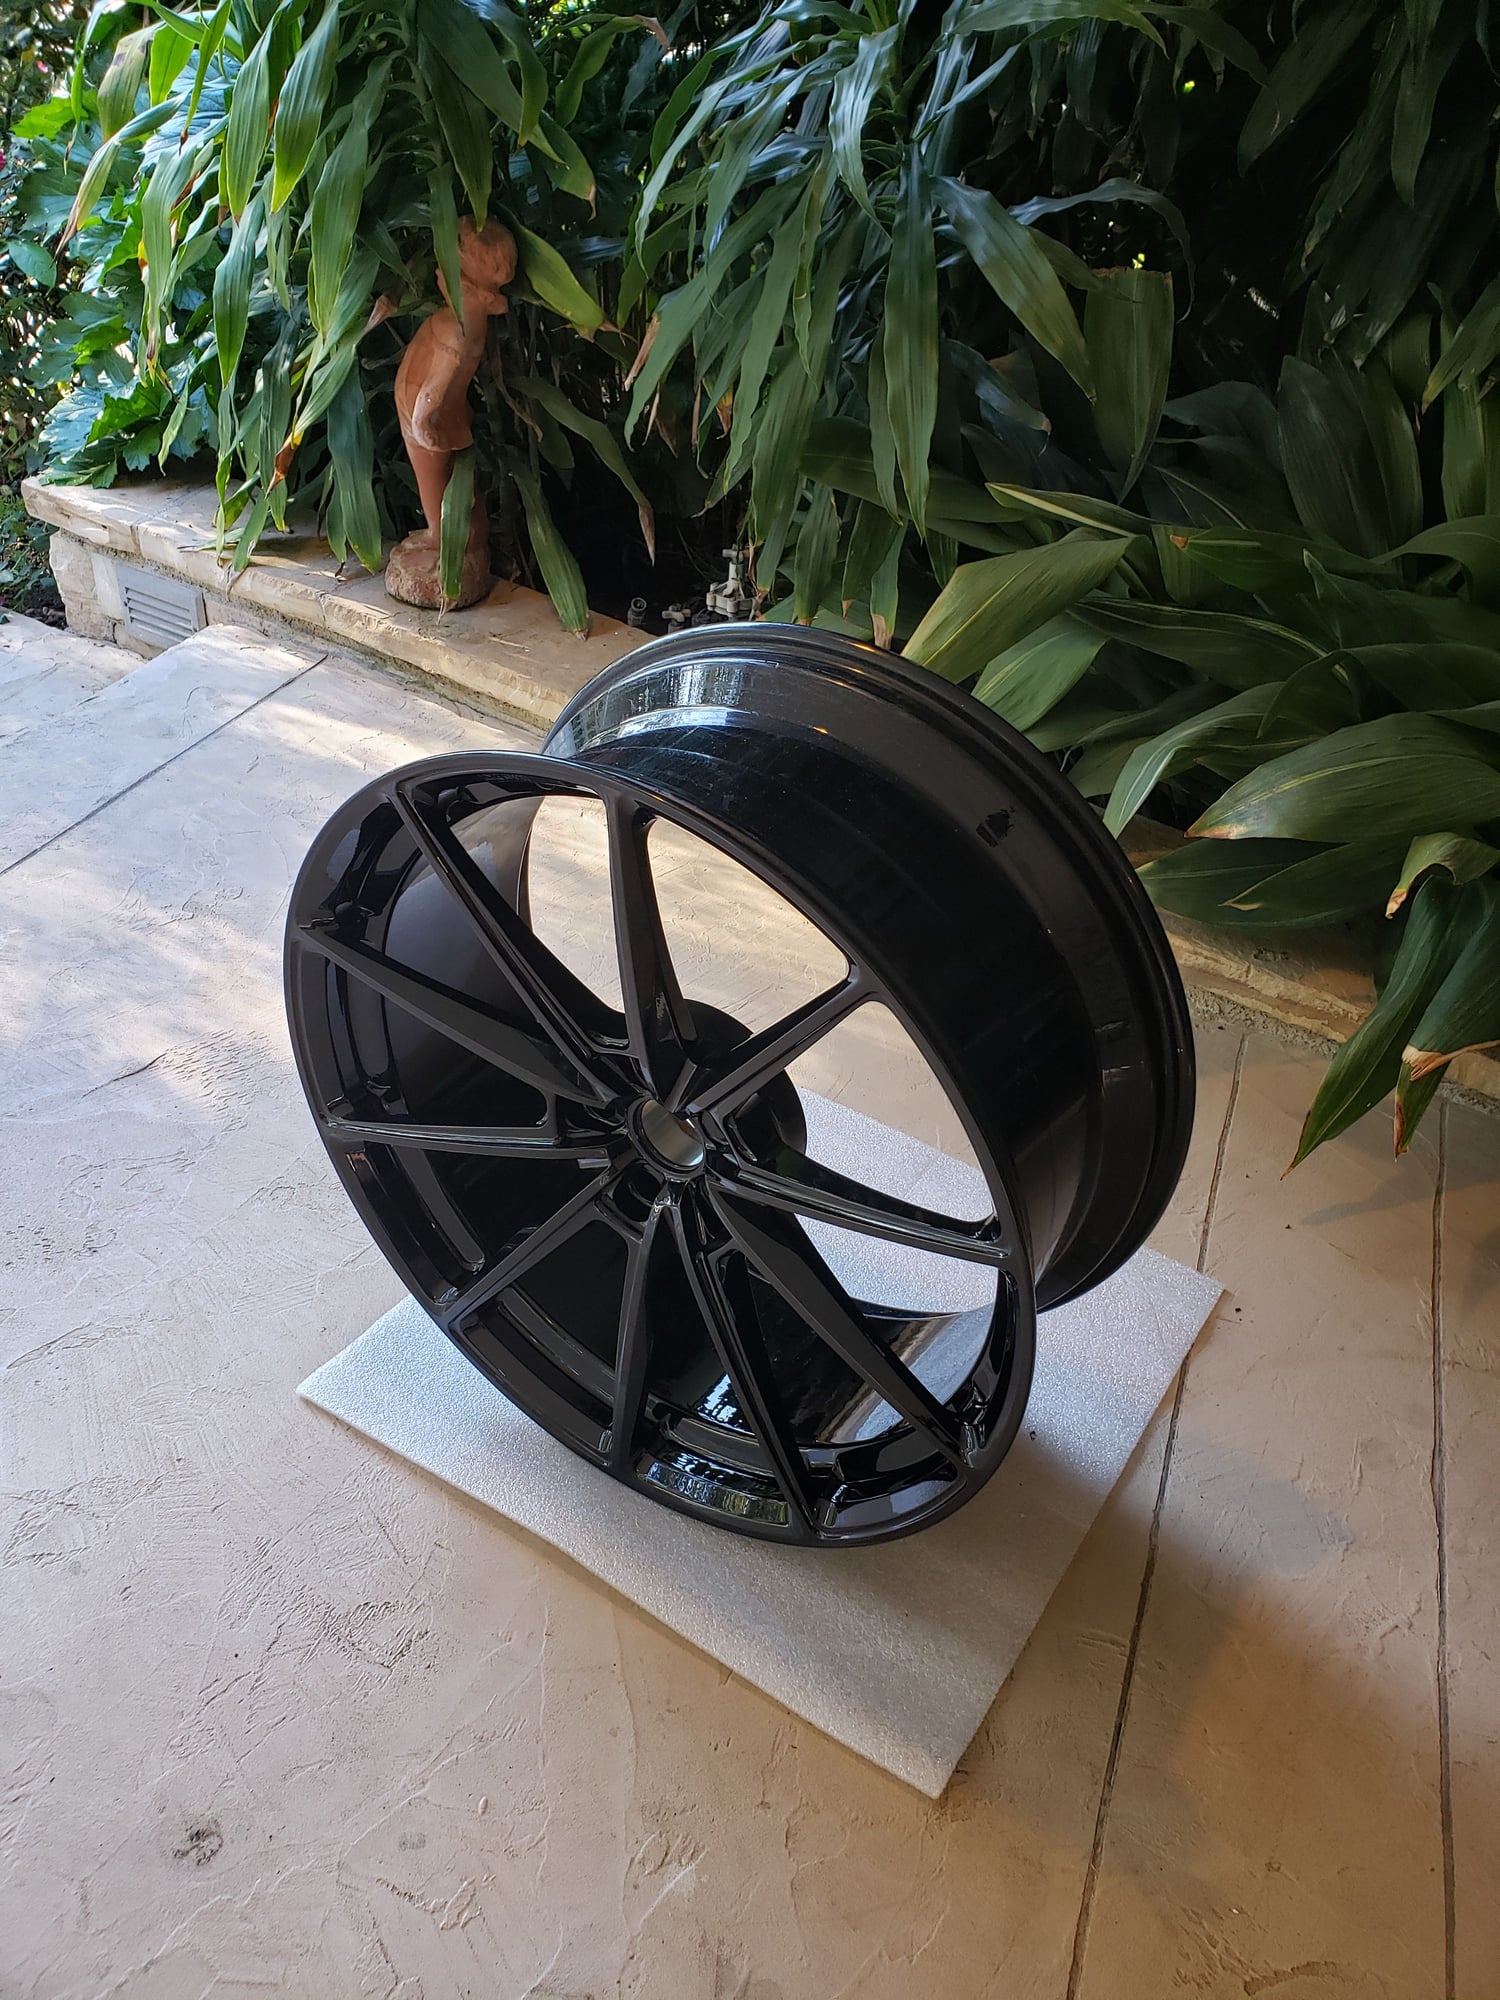 Wheels and Tires/Axles - 24" ANRKY WHEELS NEW CONDITION 5X130 - New - All Years Mercedes-Benz G-Class - Agoura Hills, CA 91301, United States